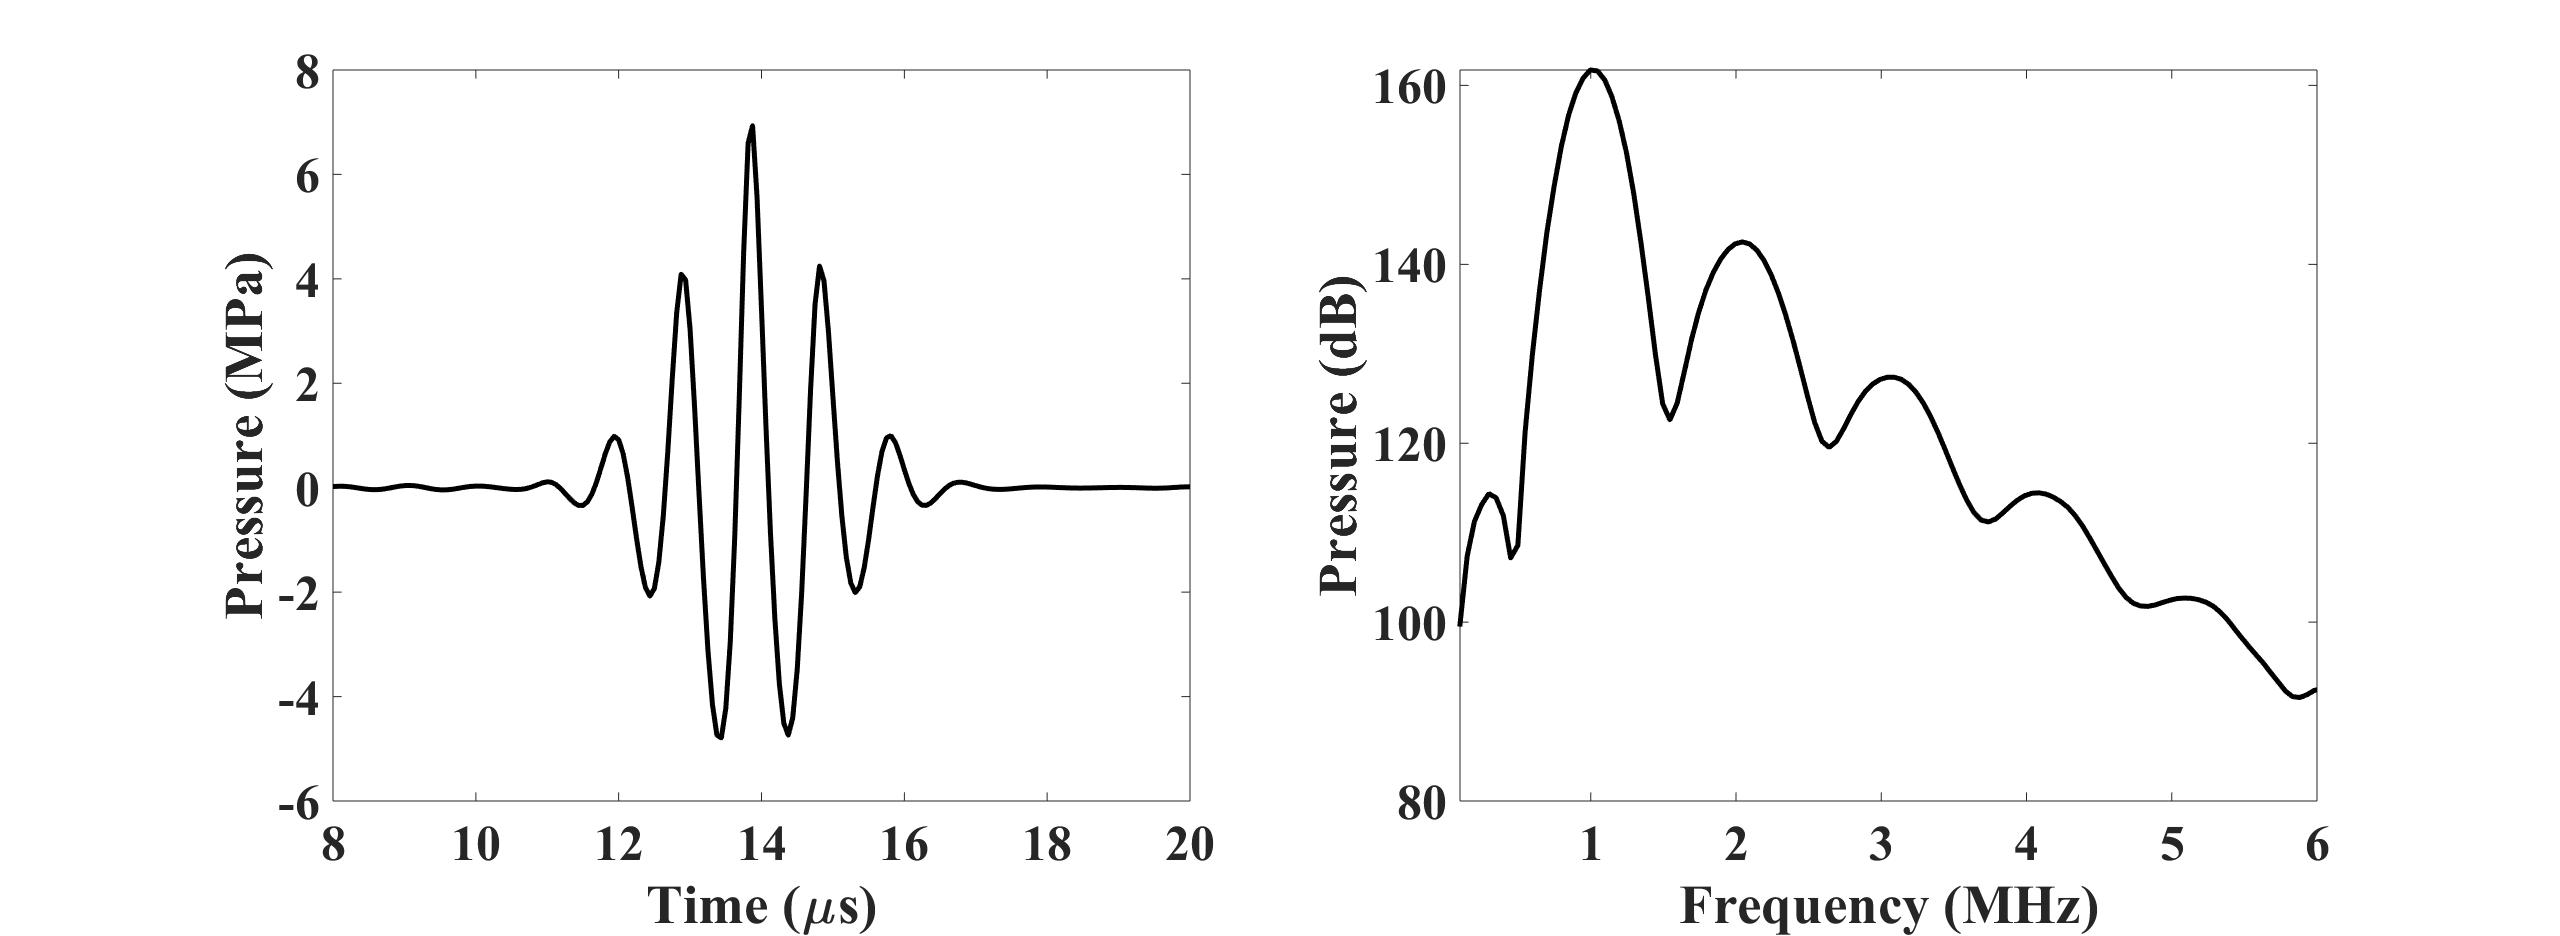 Time and frequency-domain signals recorded at the transducer focus